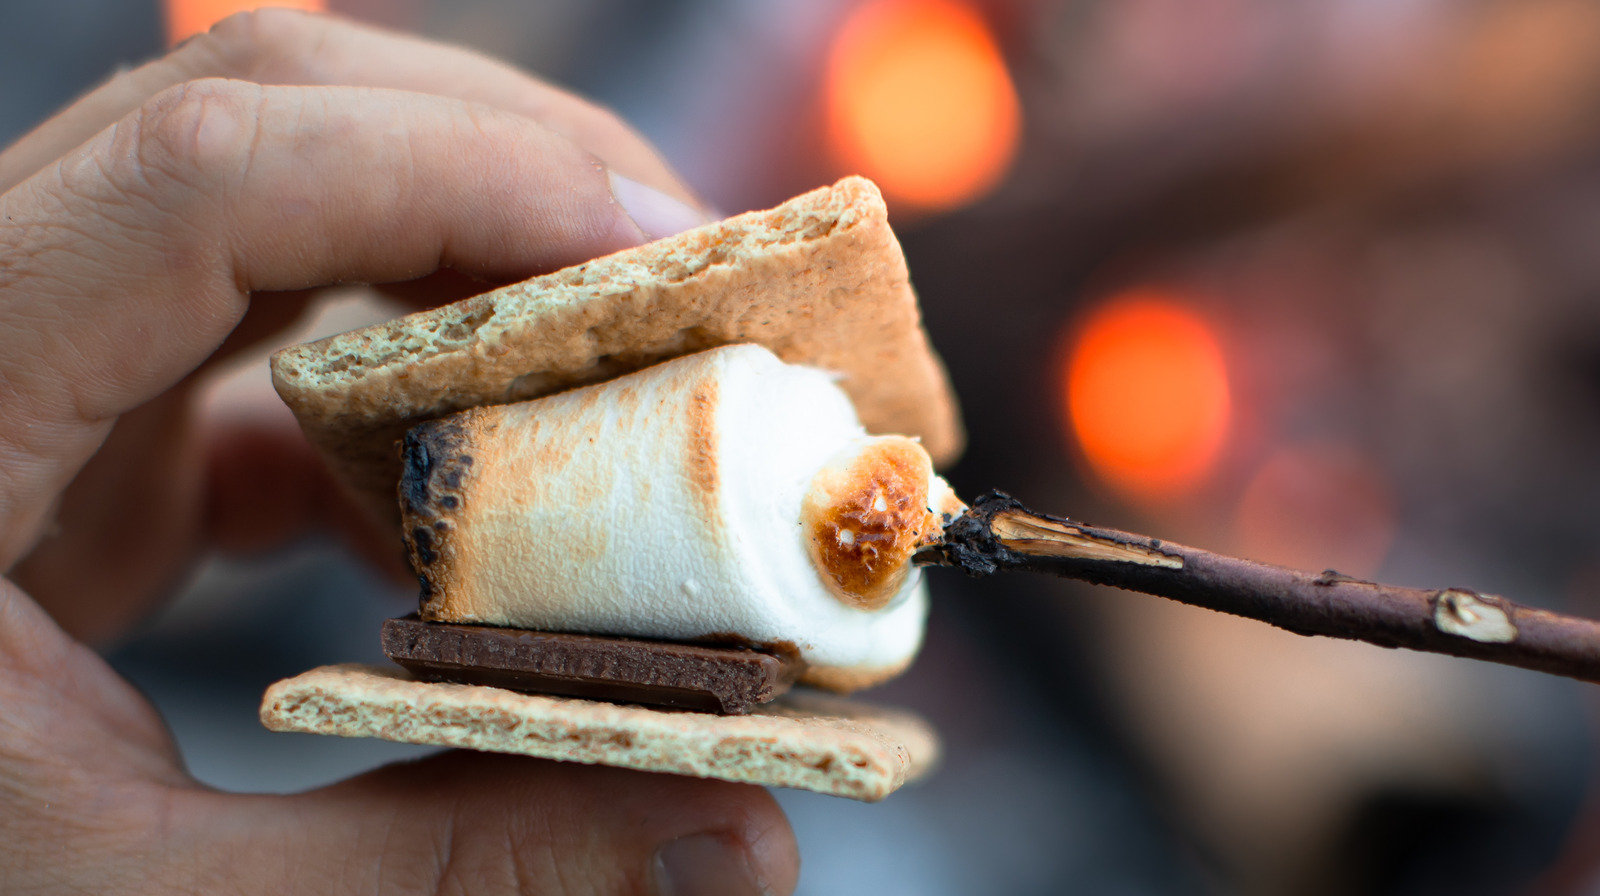 14 Secret Ingredients for Ridiculously Good S'mores